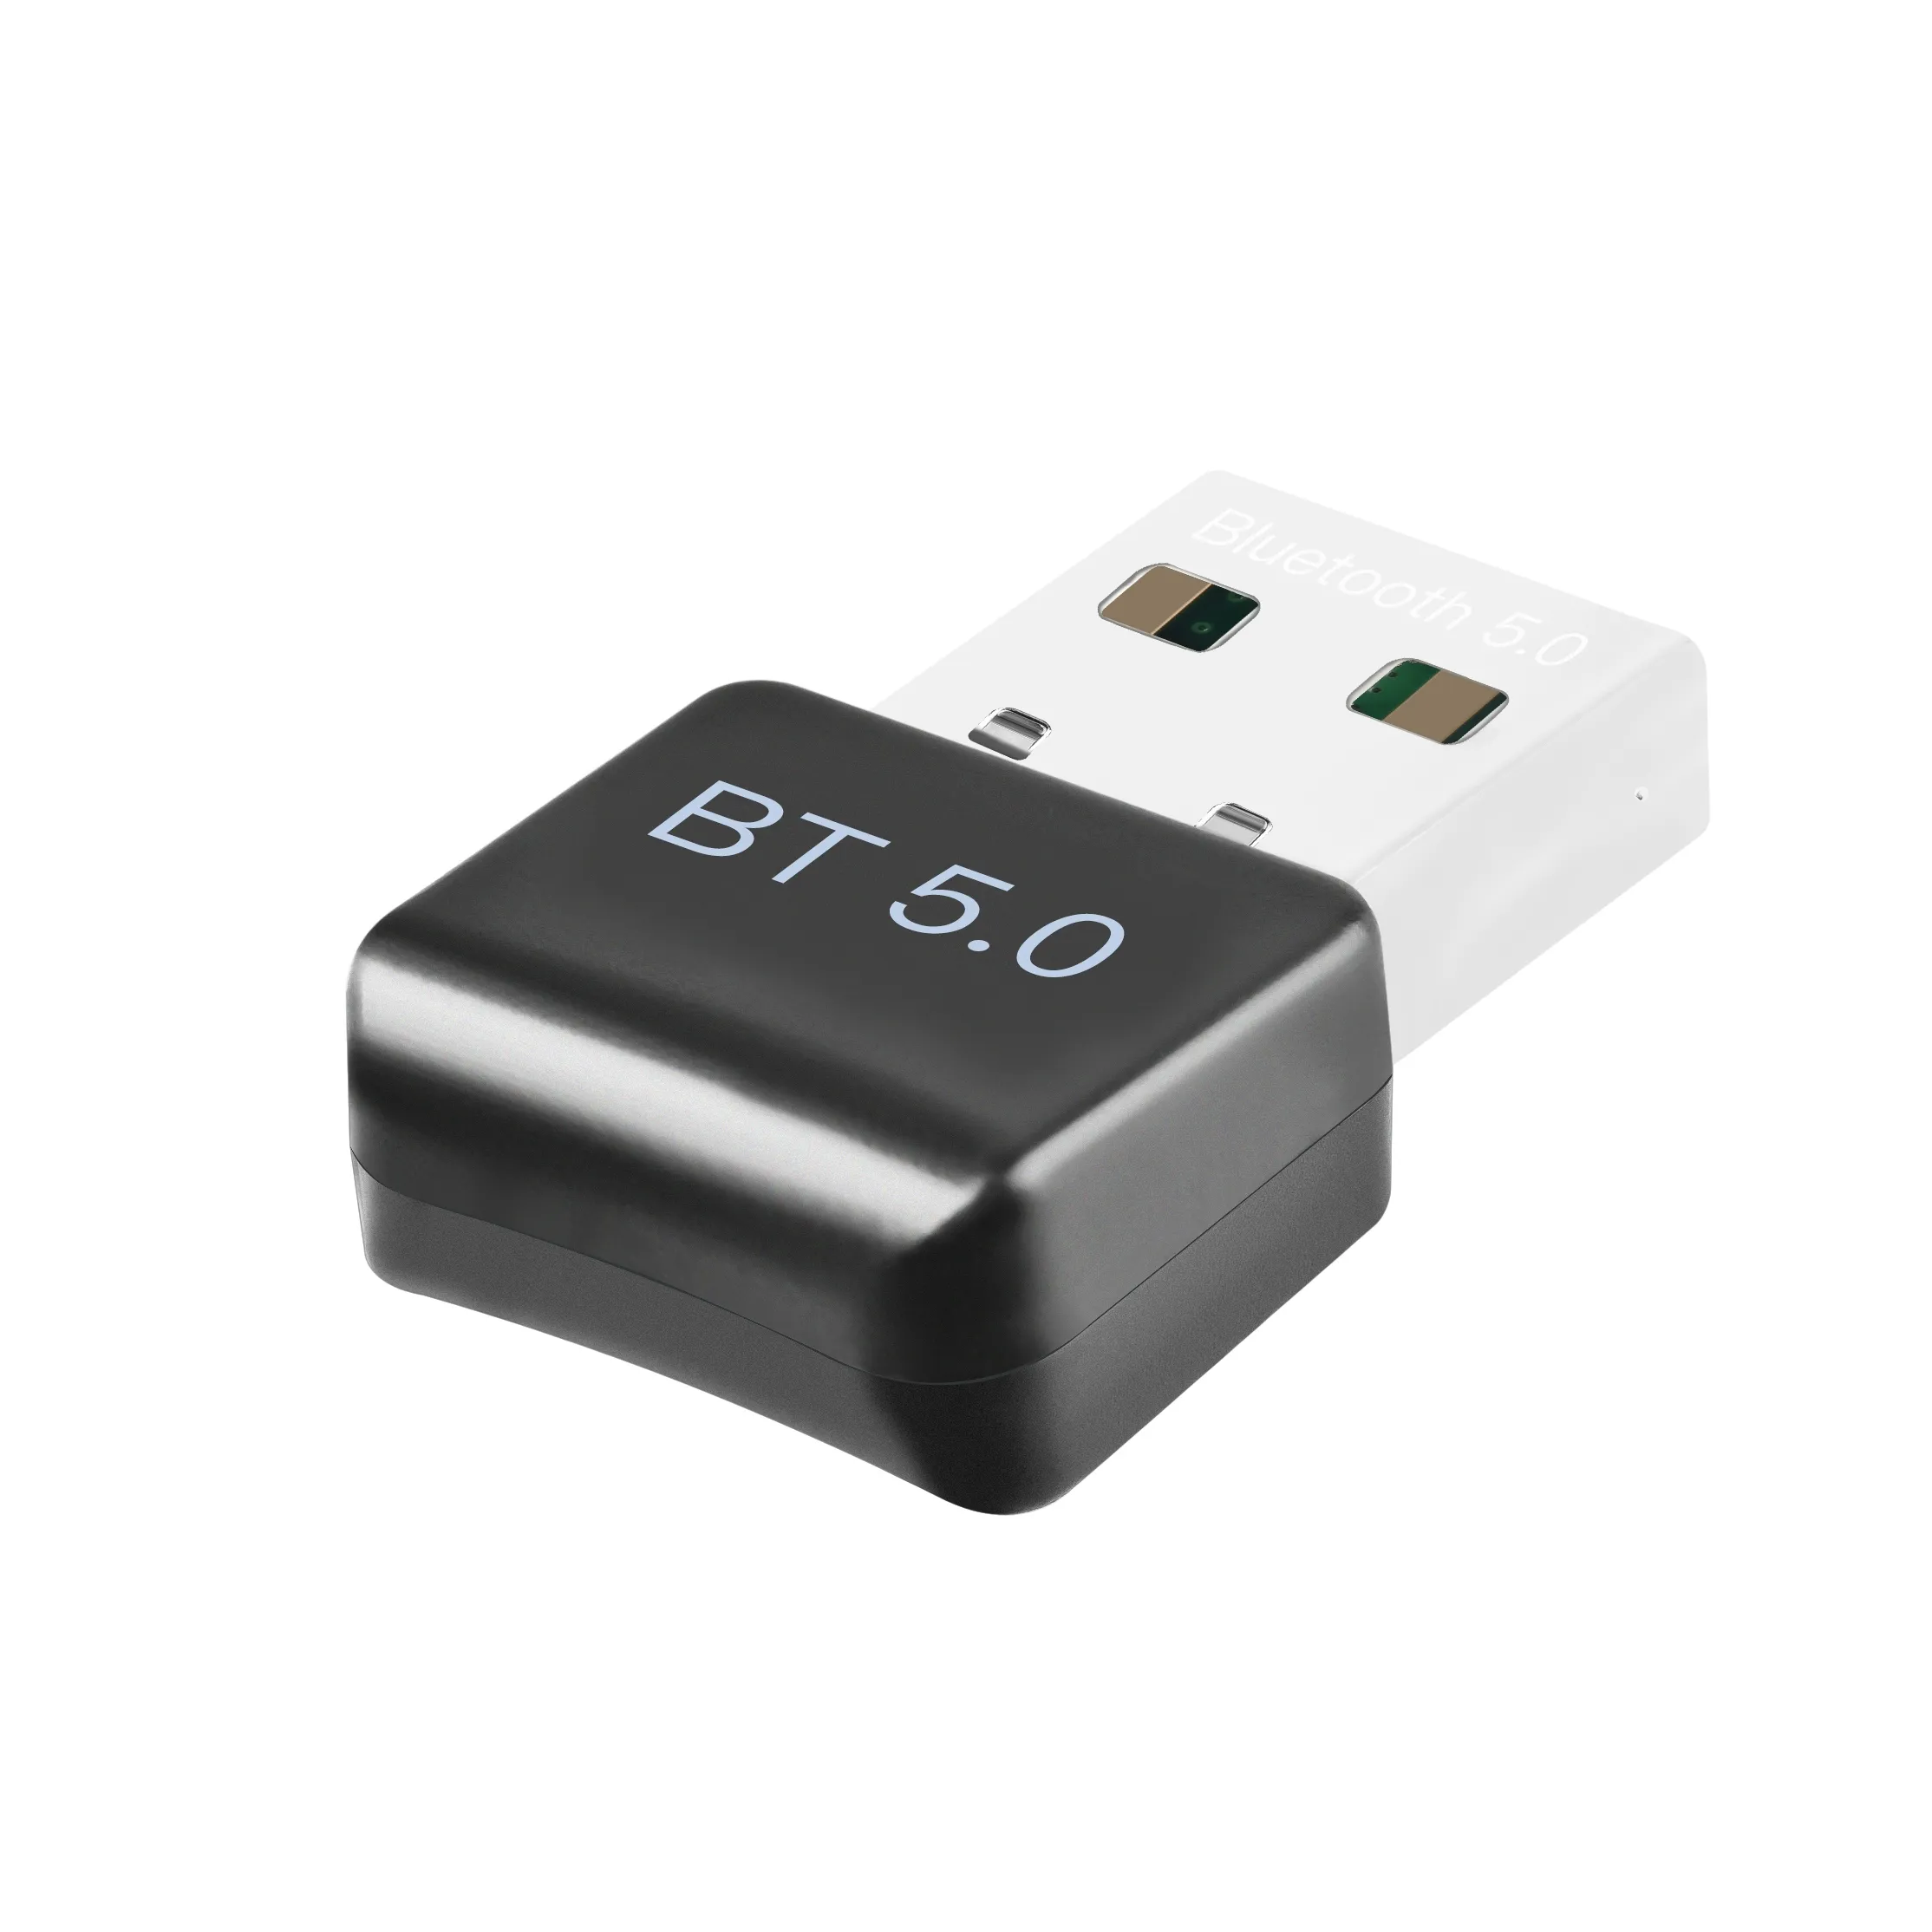 Hot sale 2022 HG Best mini USB wireless adapter dongle with chipset of RTL8761B